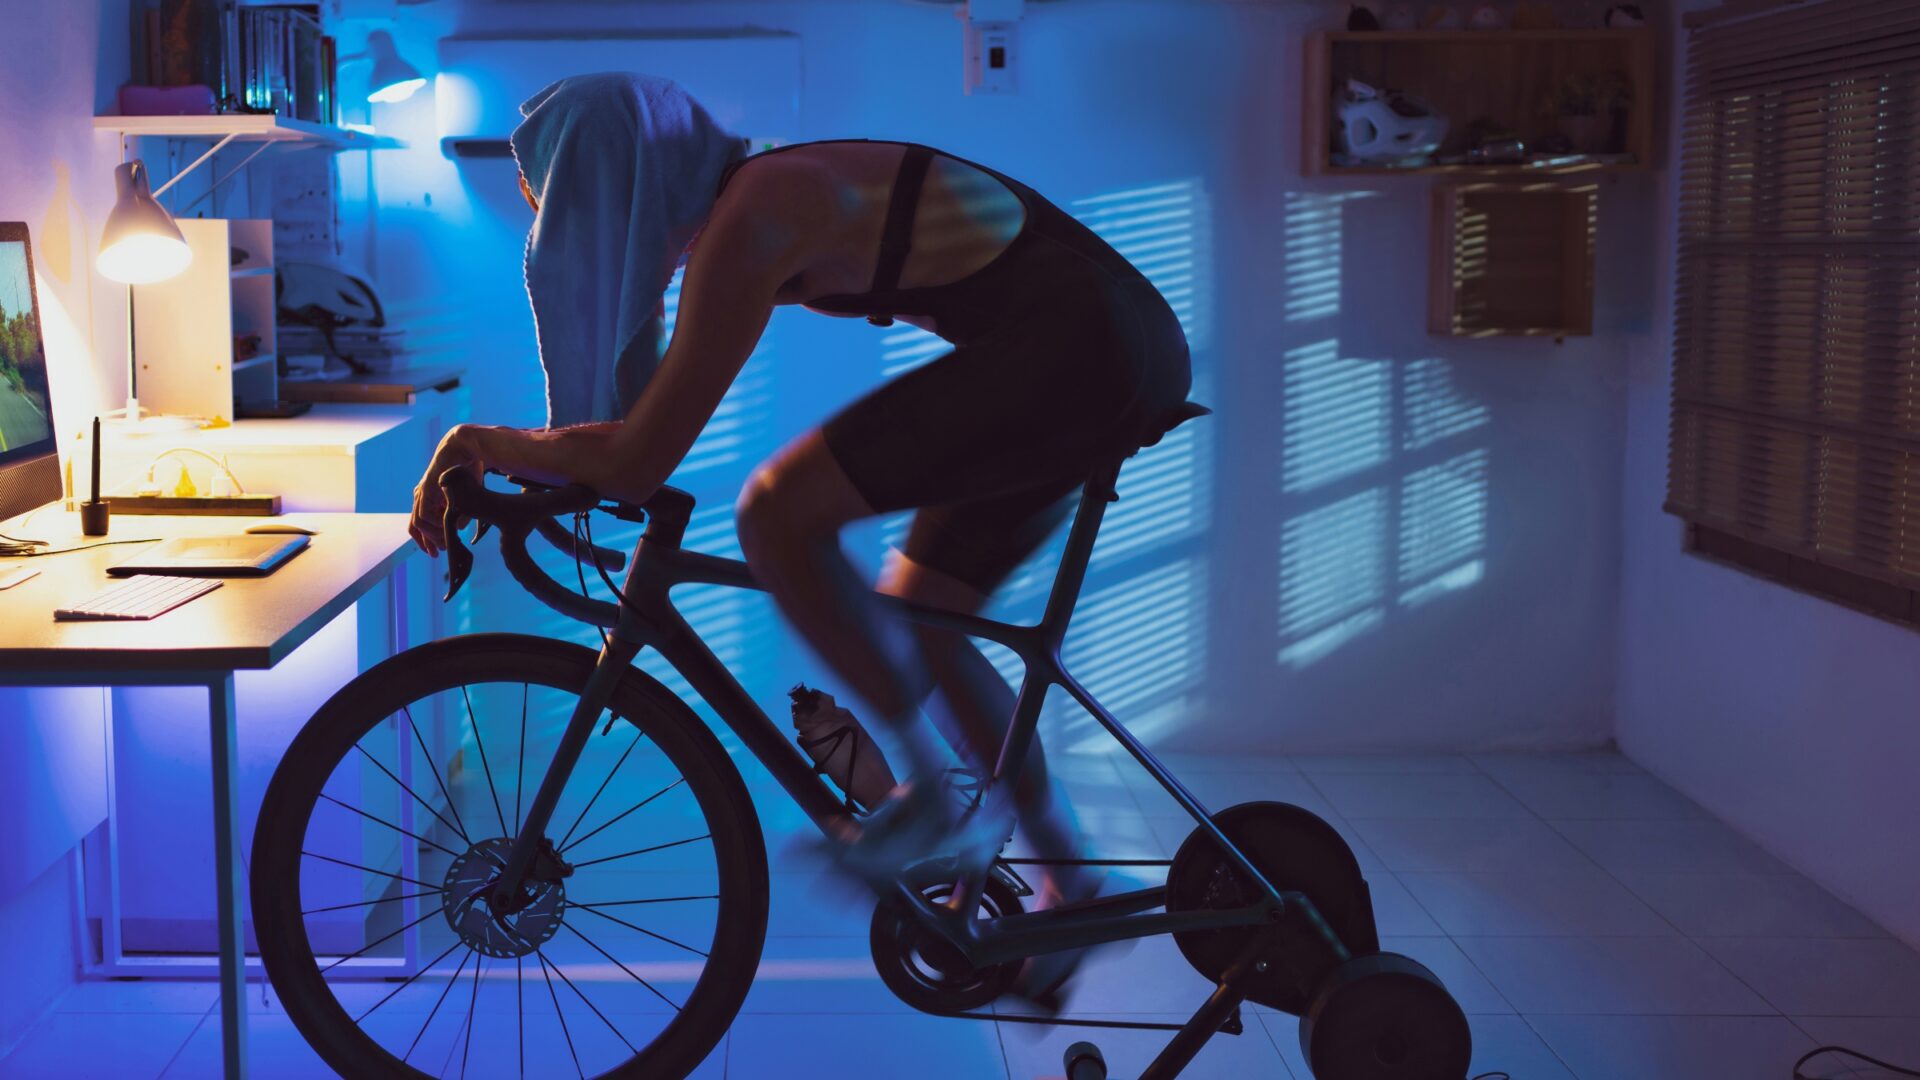 Cyclist rides on an indoor trainer in a dark room. He has his shirt covering his head